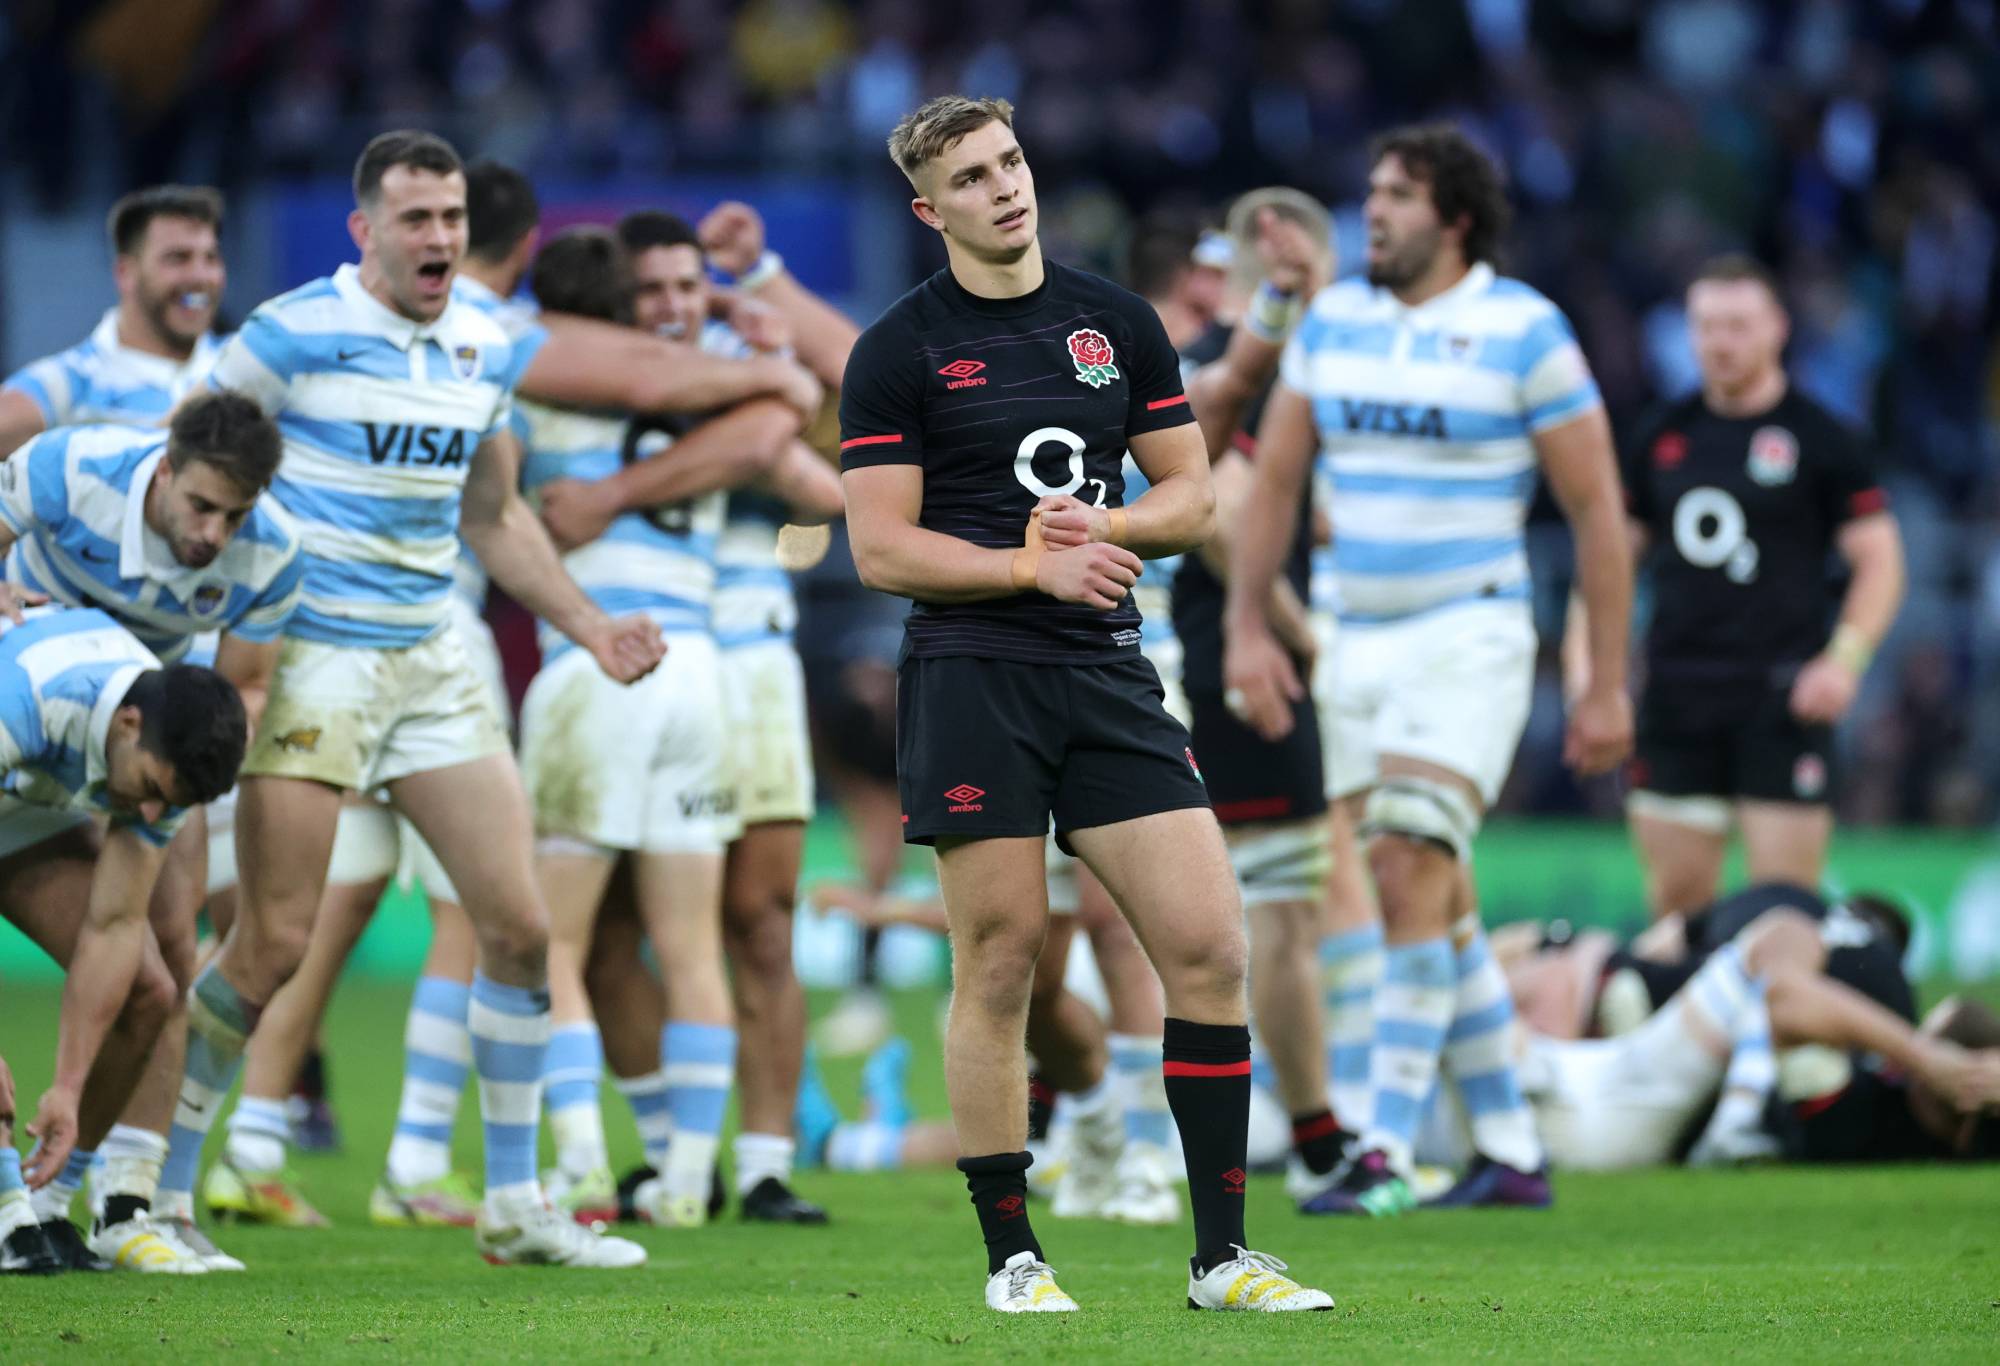 England's Jack van Poortvliet looks dejected after the final whistle of the England v Argentina Autumn International match at Twickenham Stadium on November 6, 2022 in London, England.  (Photo by David Rogers/Getty Images)